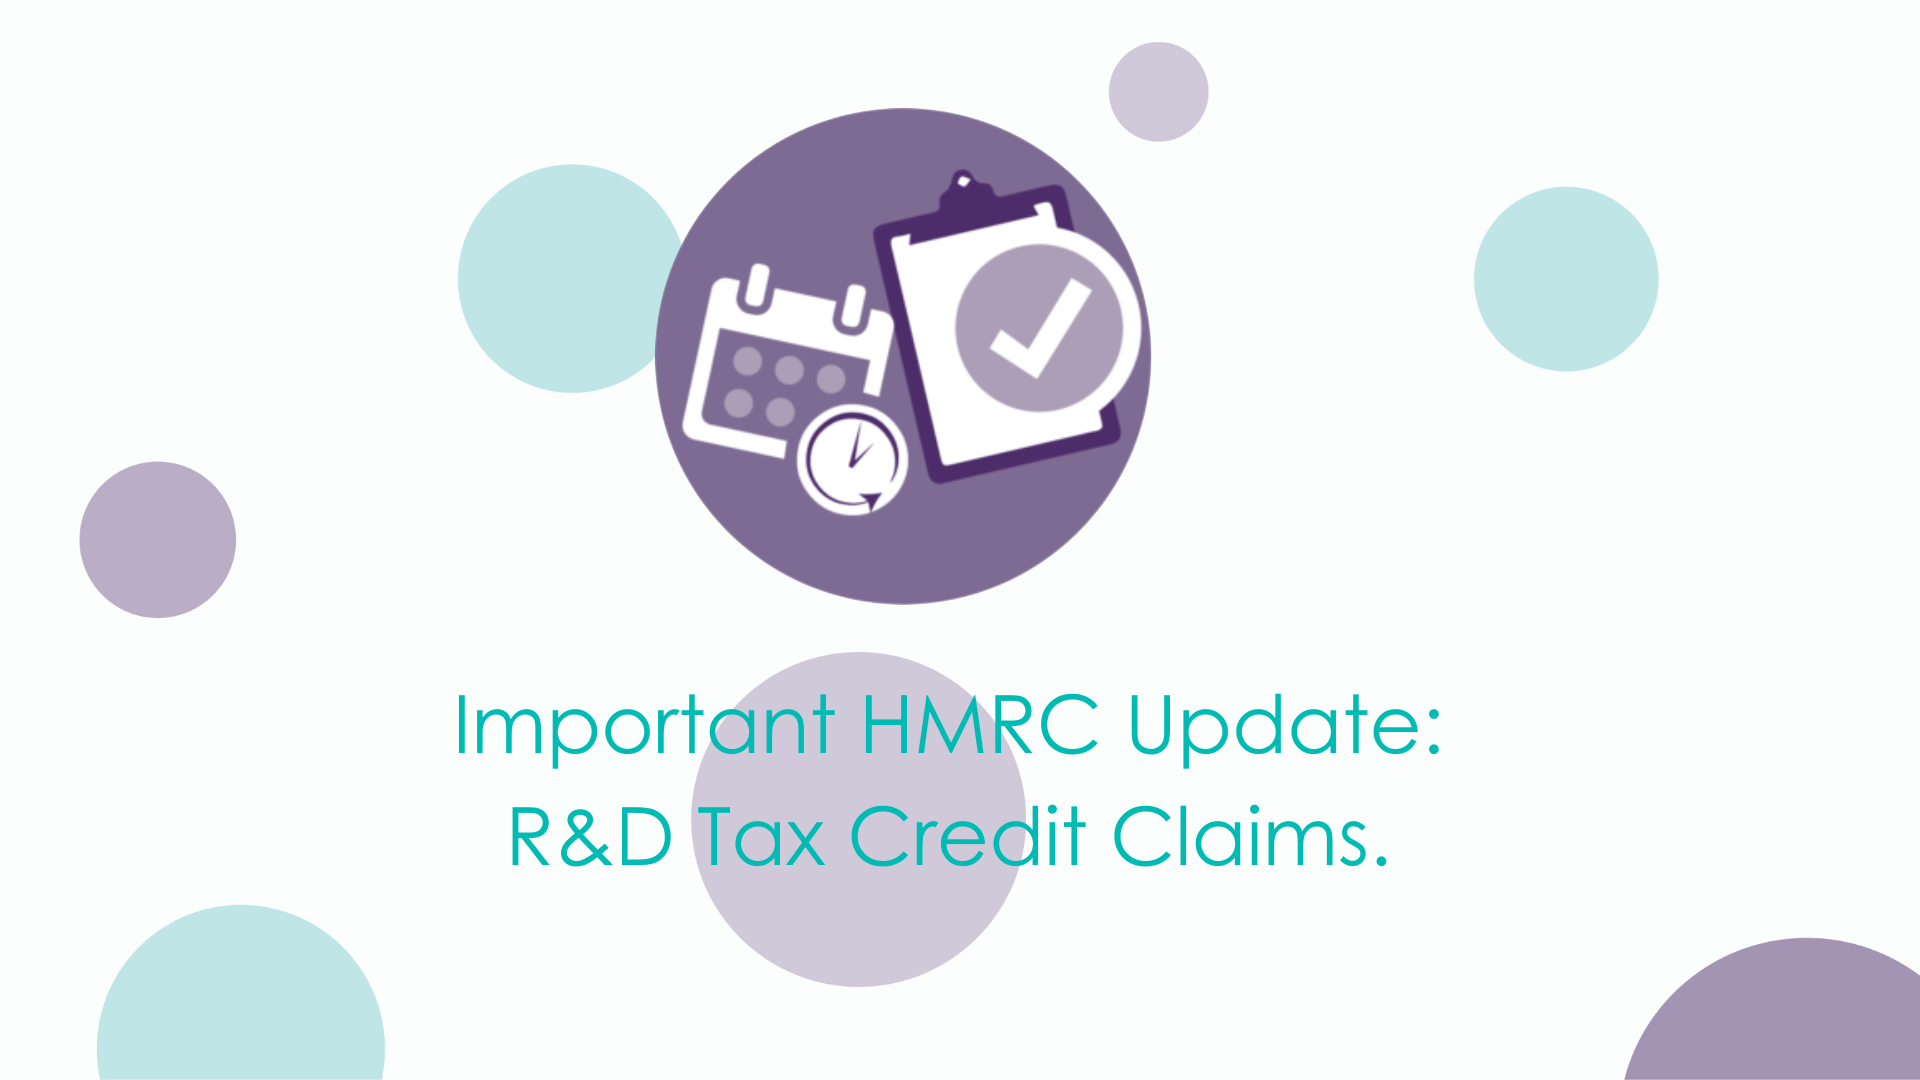 Important HMRC Update: R&D Tax Credit Claims